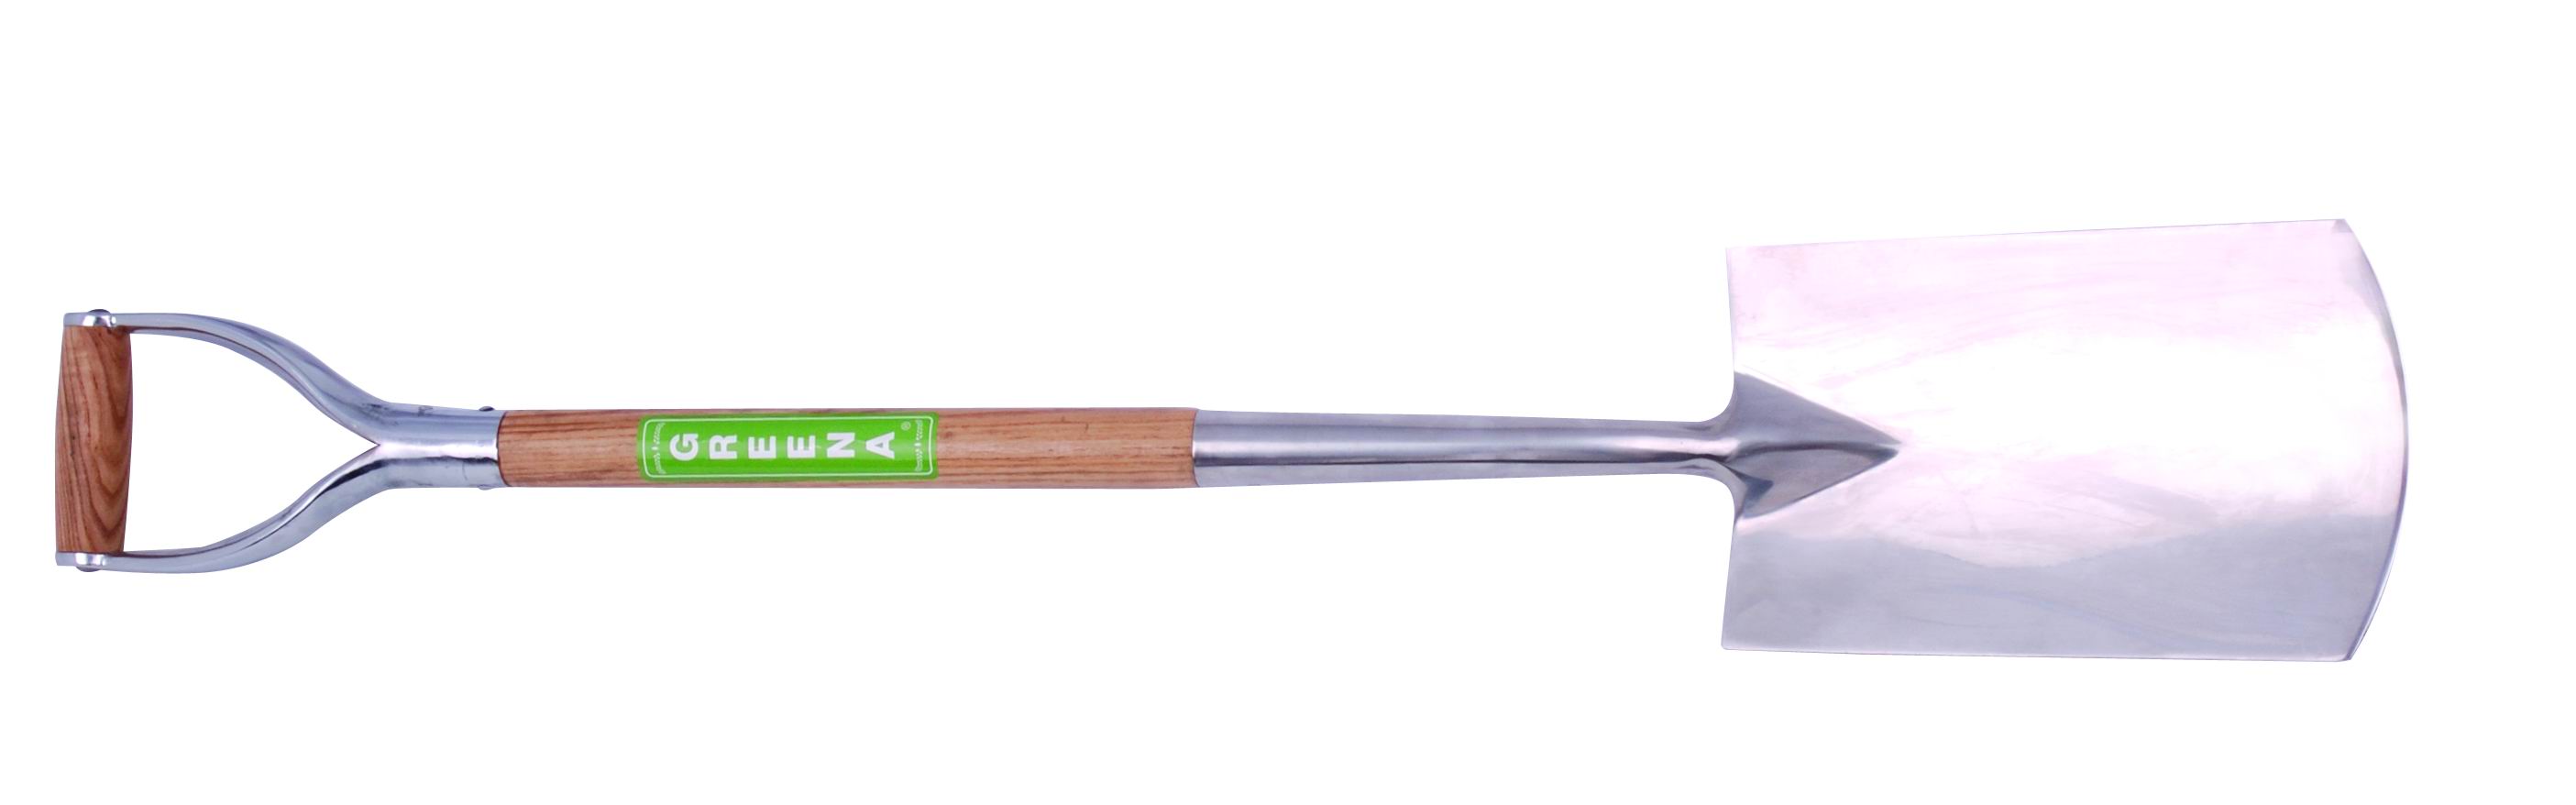  Stainless Steel Digging Spade with Ash Wood Shaft and Armor Grip ( Stainless Steel Digging Spade with Ash Wood Shaft and Armor Grip)